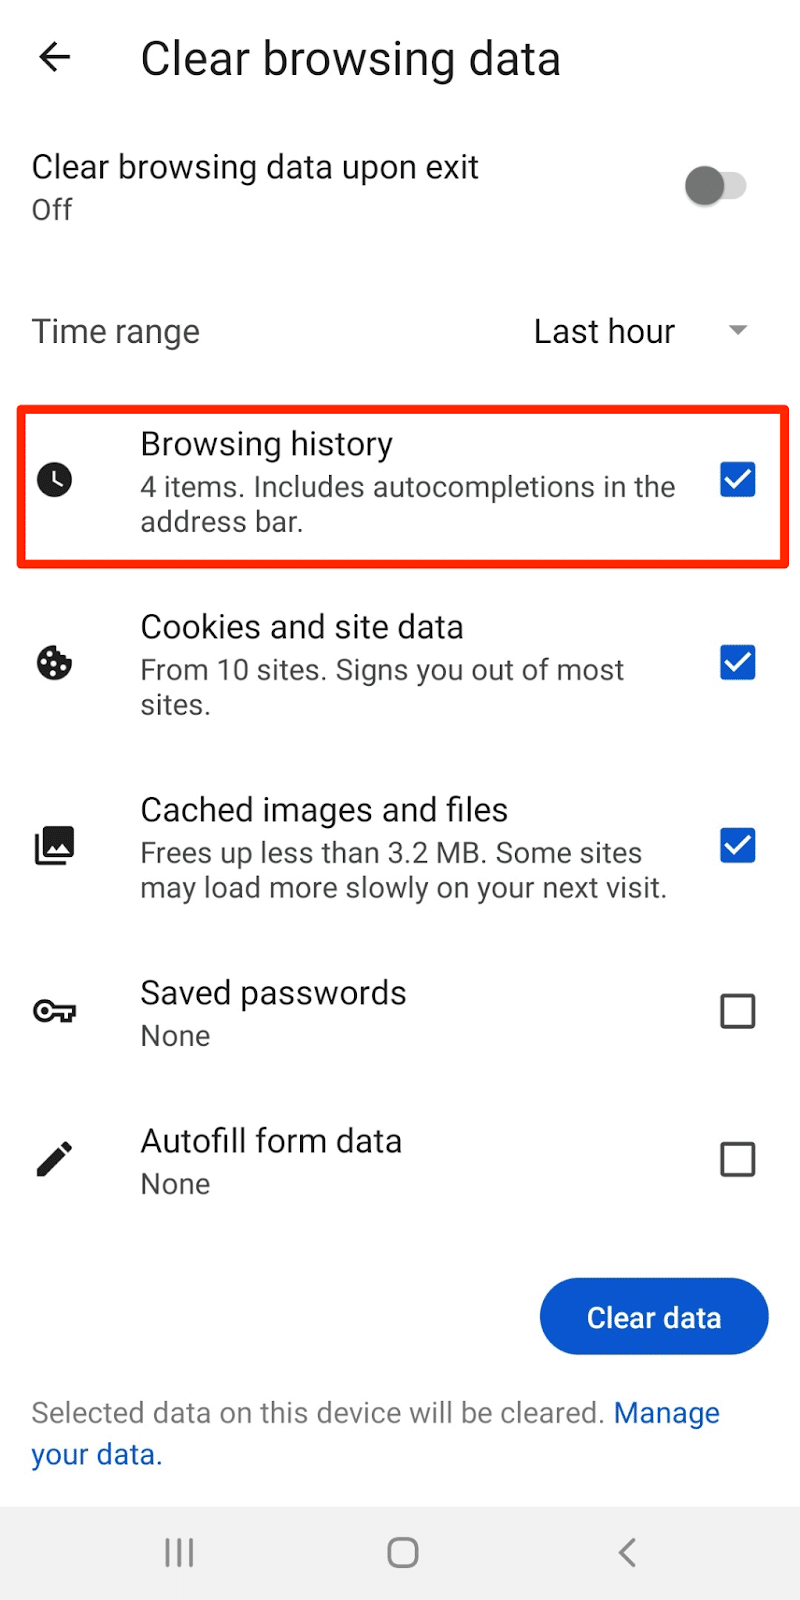 Enable the "Browsing history" box